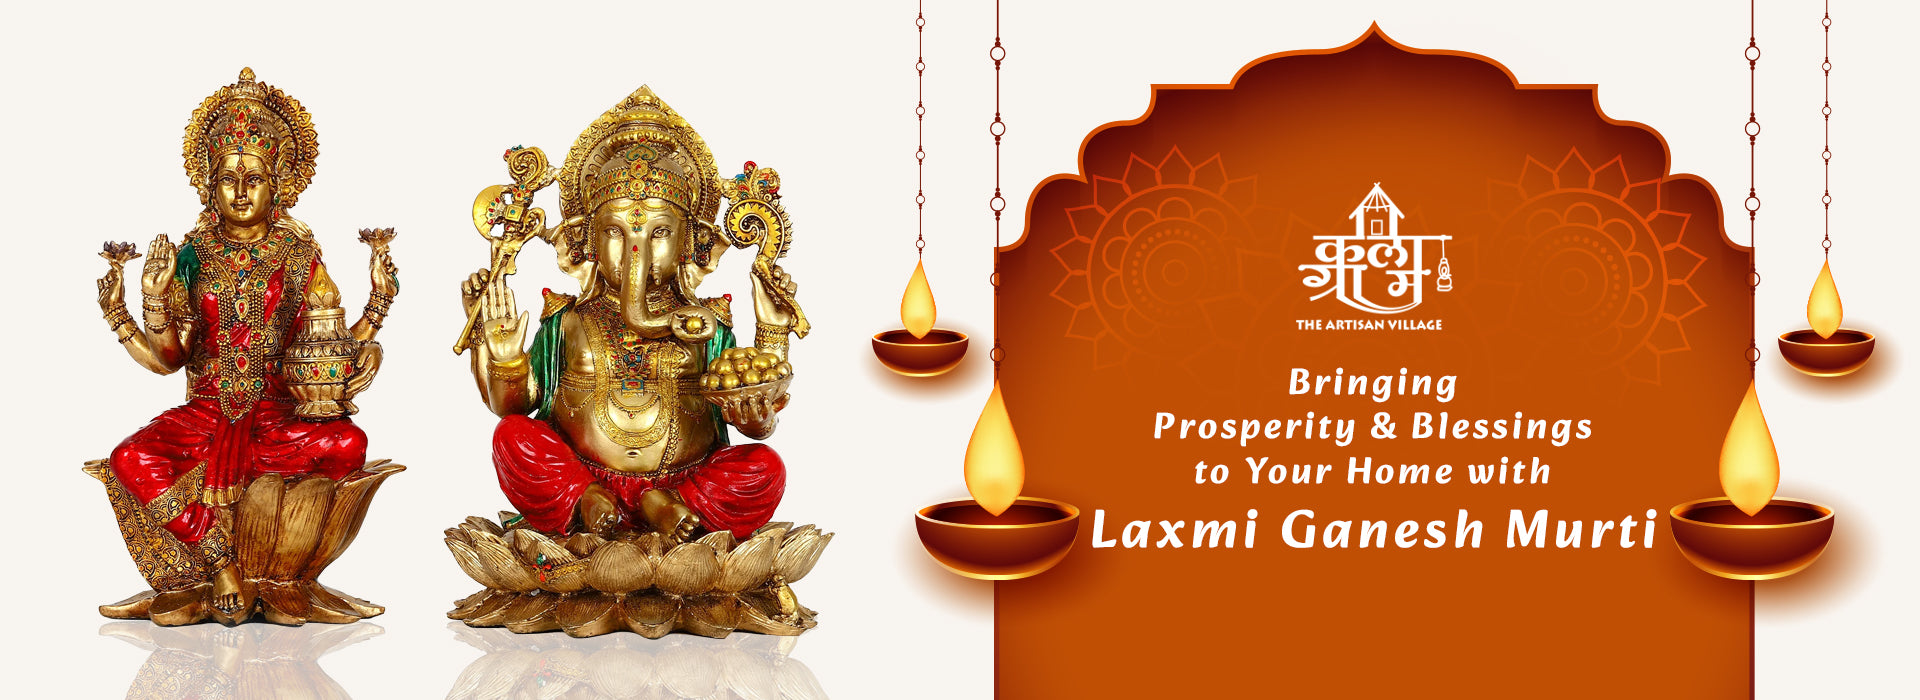 Bringing Prosperity and Blessings to Your Home with Laxmi Ganesh Murti